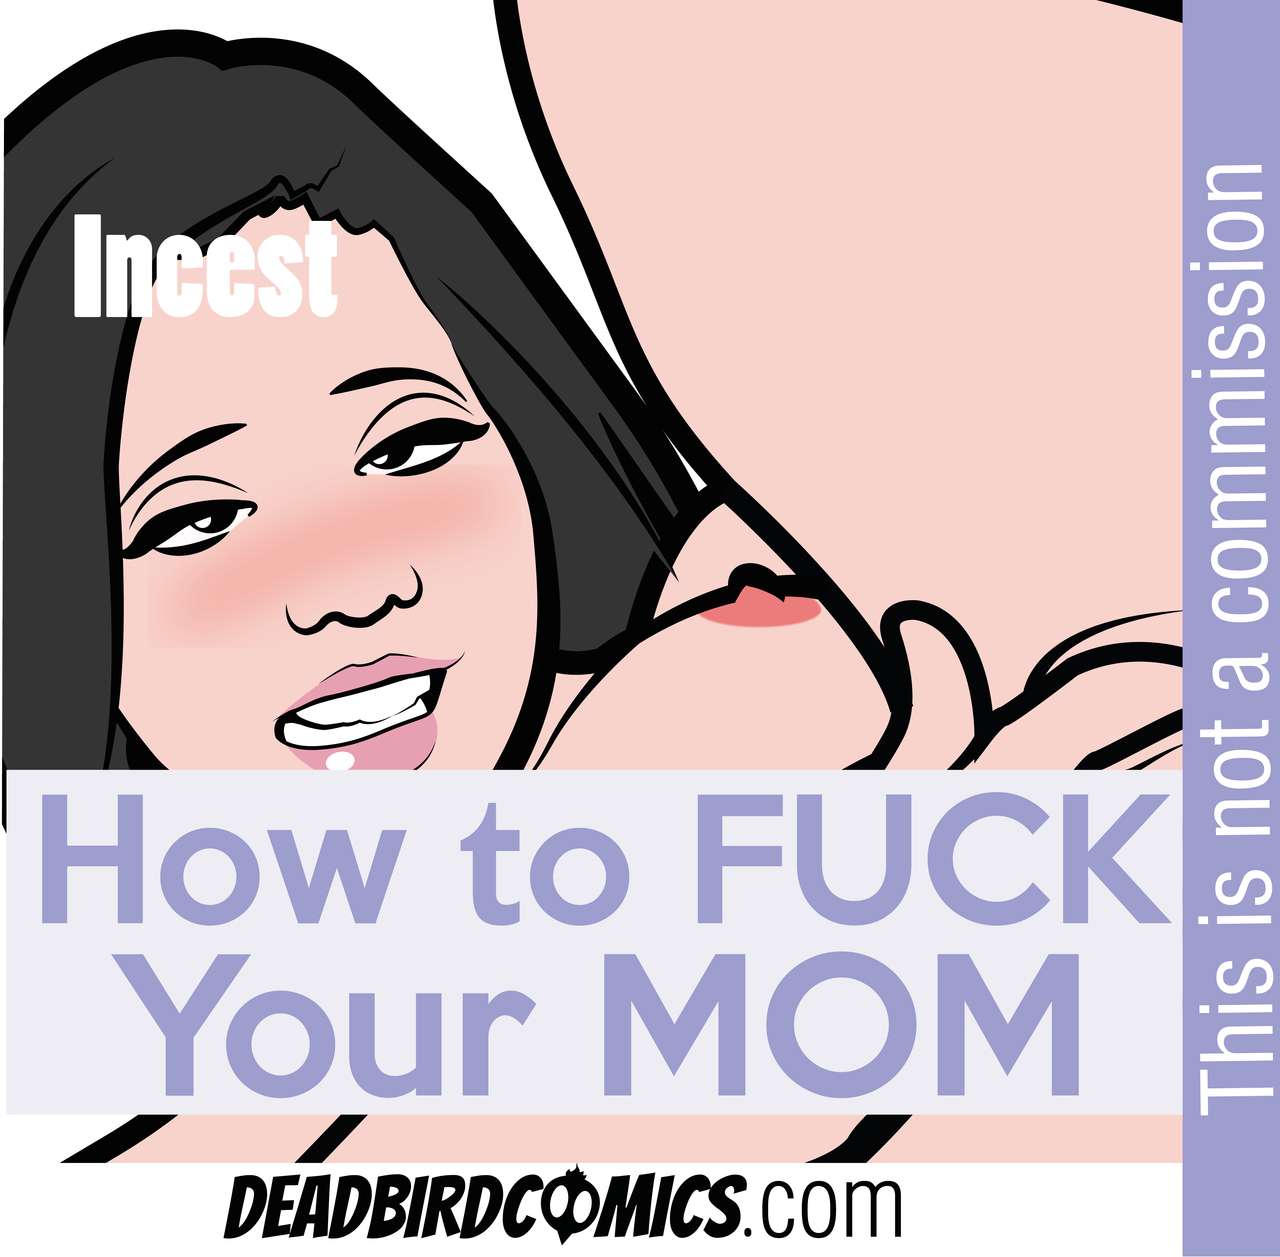 Fuck your mom after